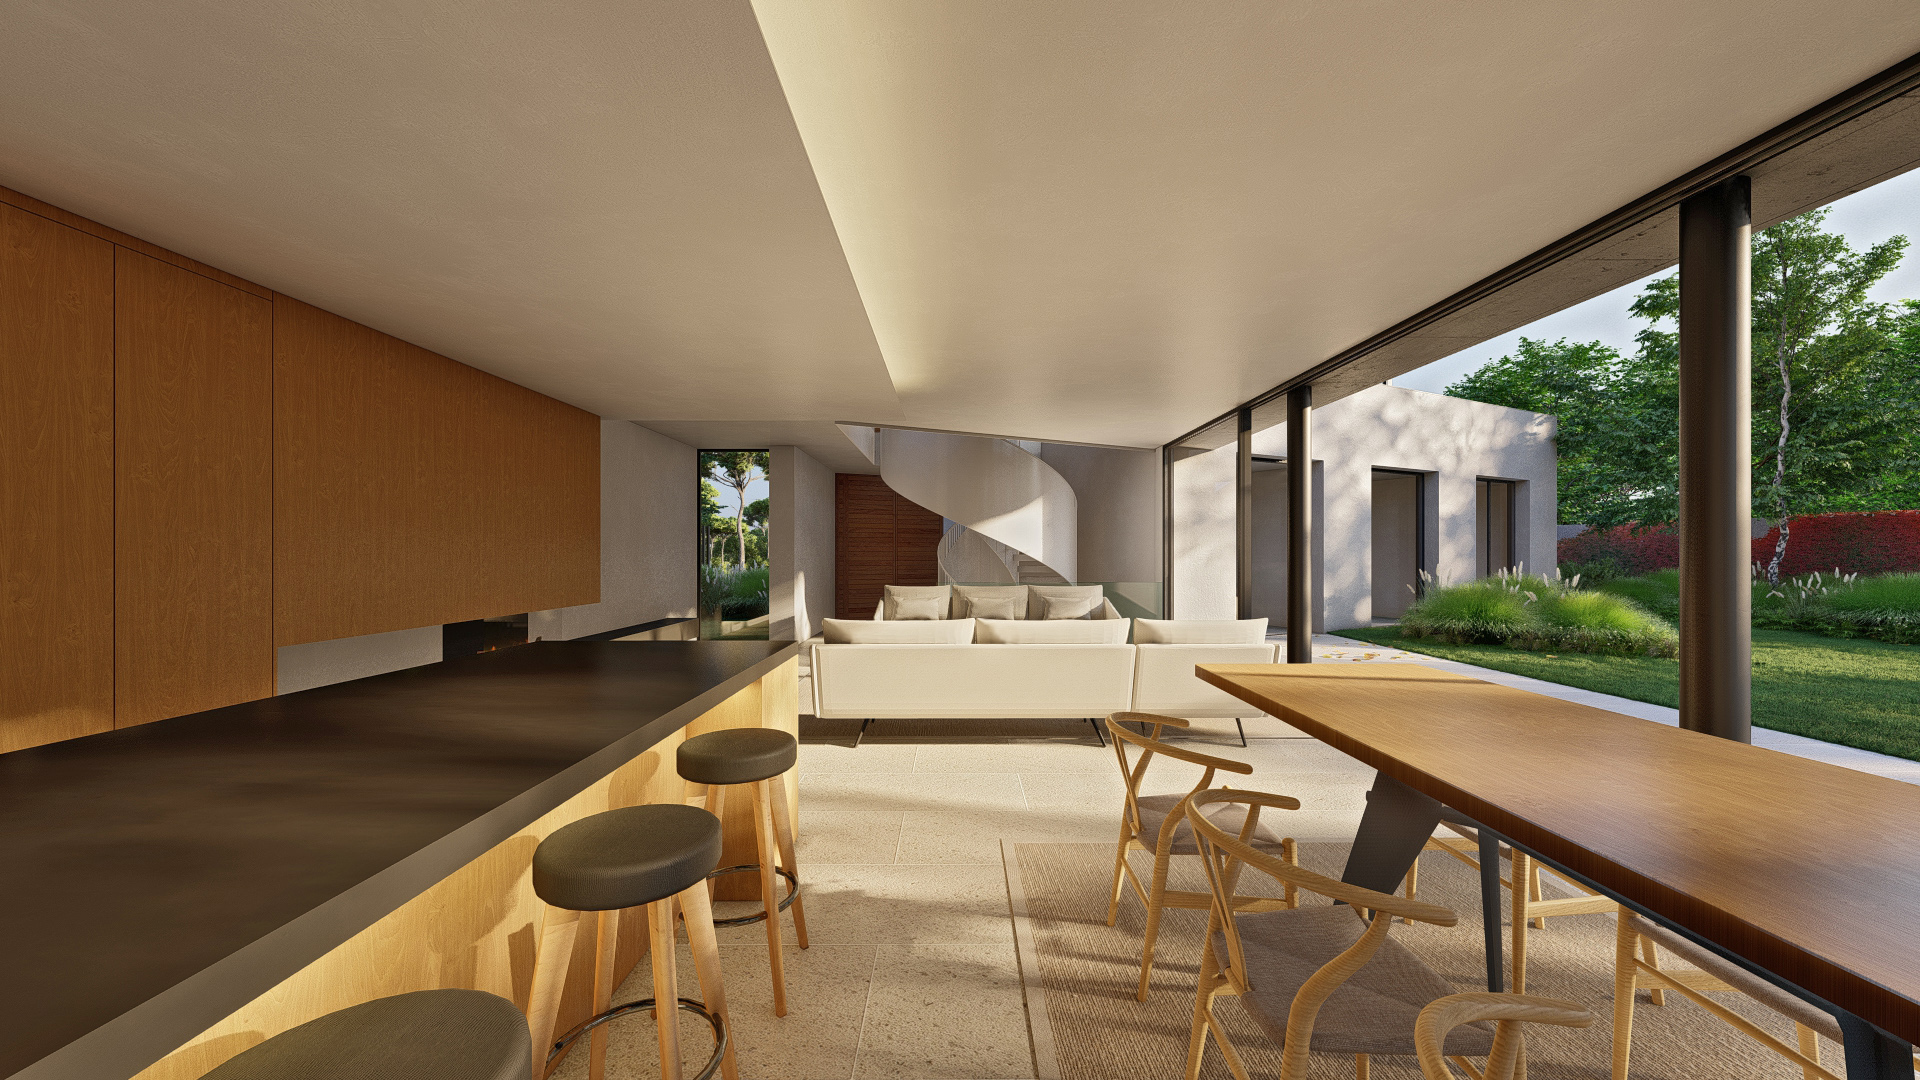 mid century modern villa in Spain House in Sitges barcelona interior view with dining area